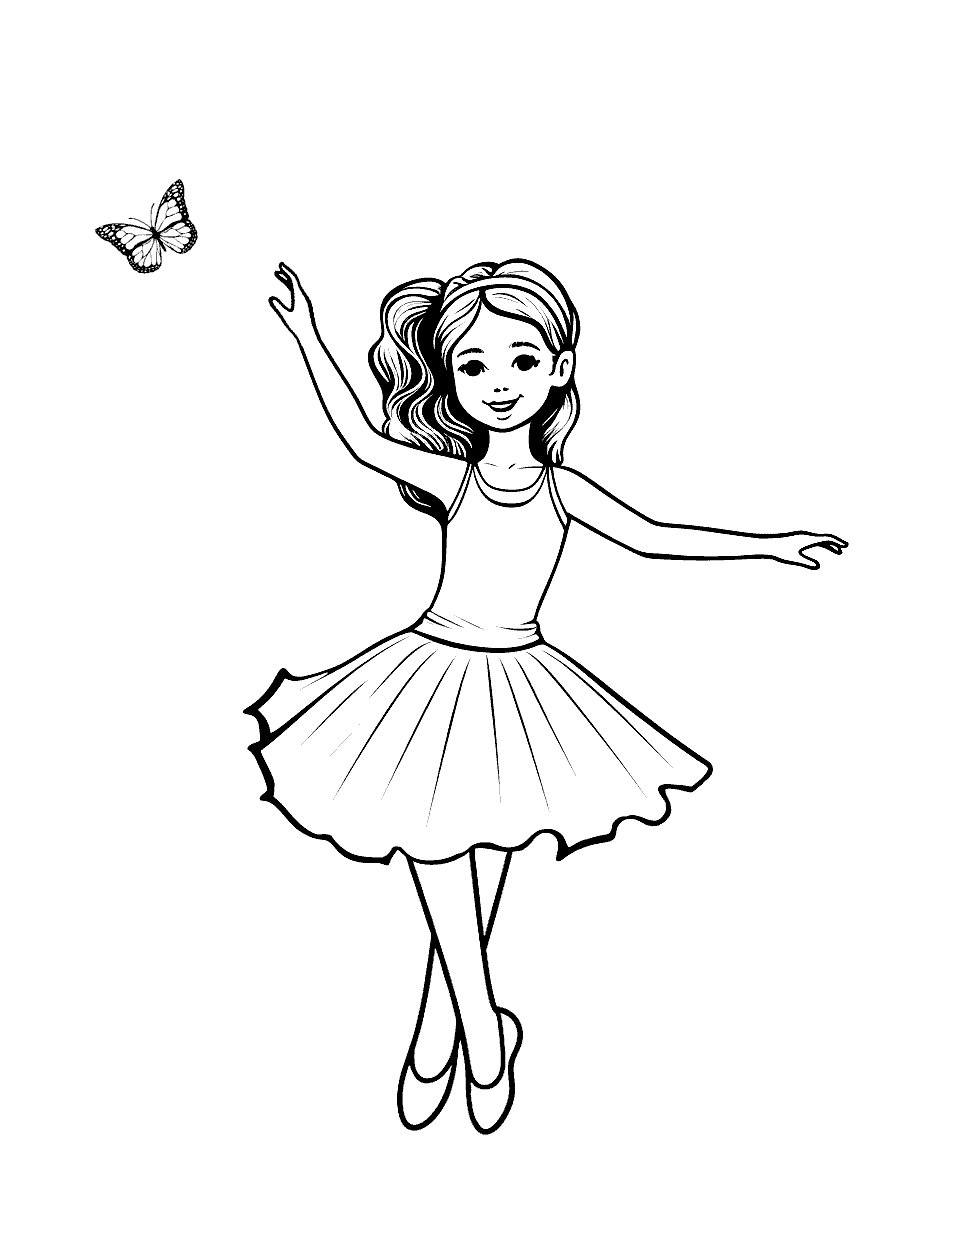 Ballerina and the Butterfly Coloring Page - A ballerina admiring a butterfly flying around her.